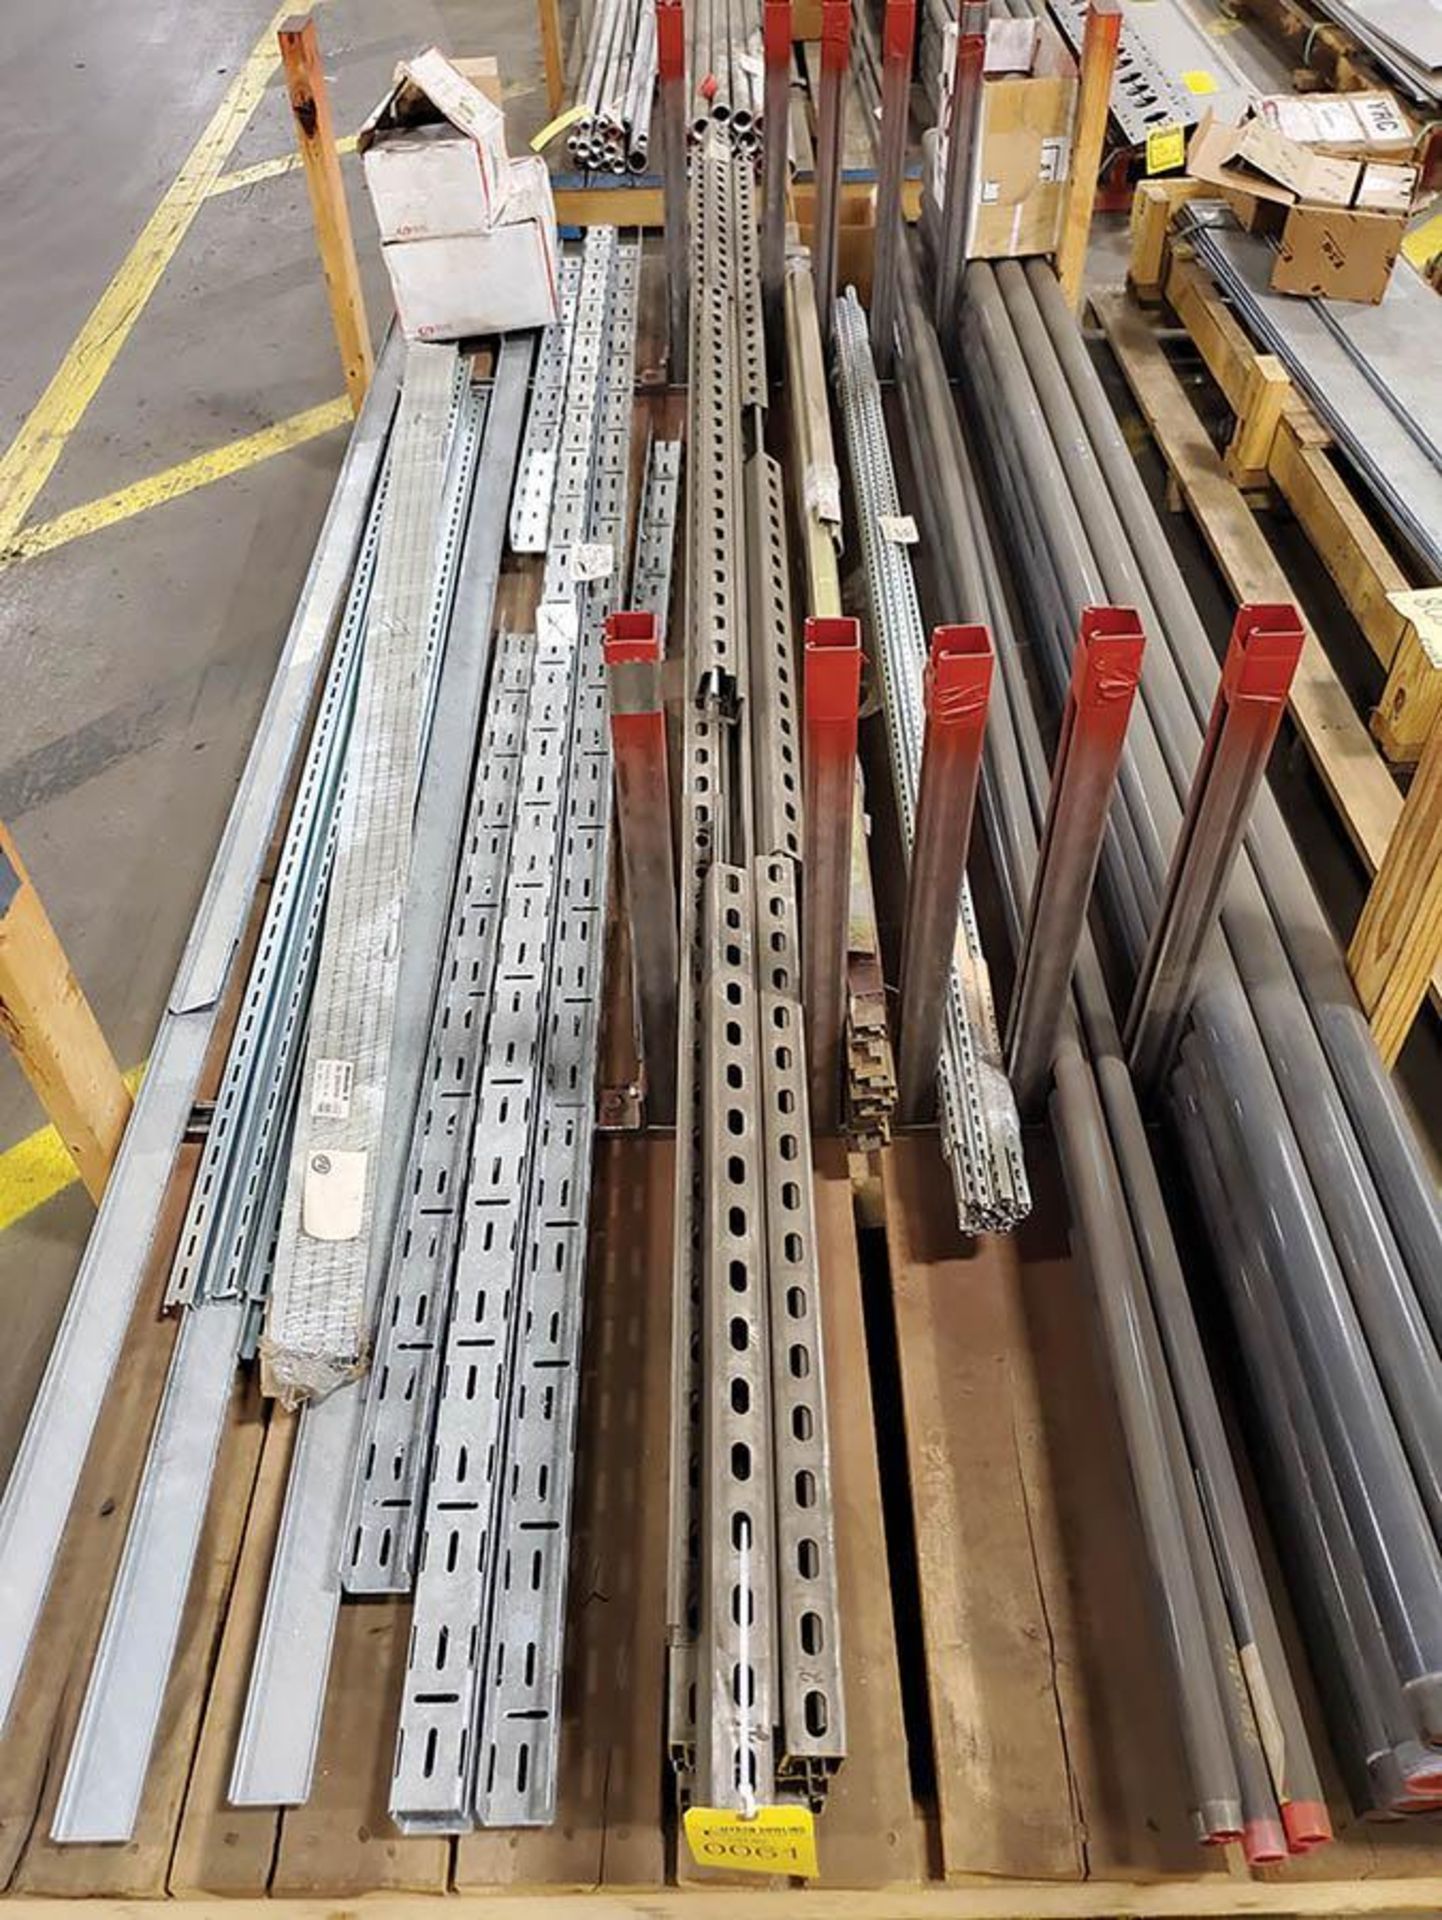 LOT OF ASSORTED DINRAIL, UNISTRUT, PVC, COATED AND HEAVY WALL CONDUIT, AND CHANNEL CABLE TRAY - Image 2 of 6